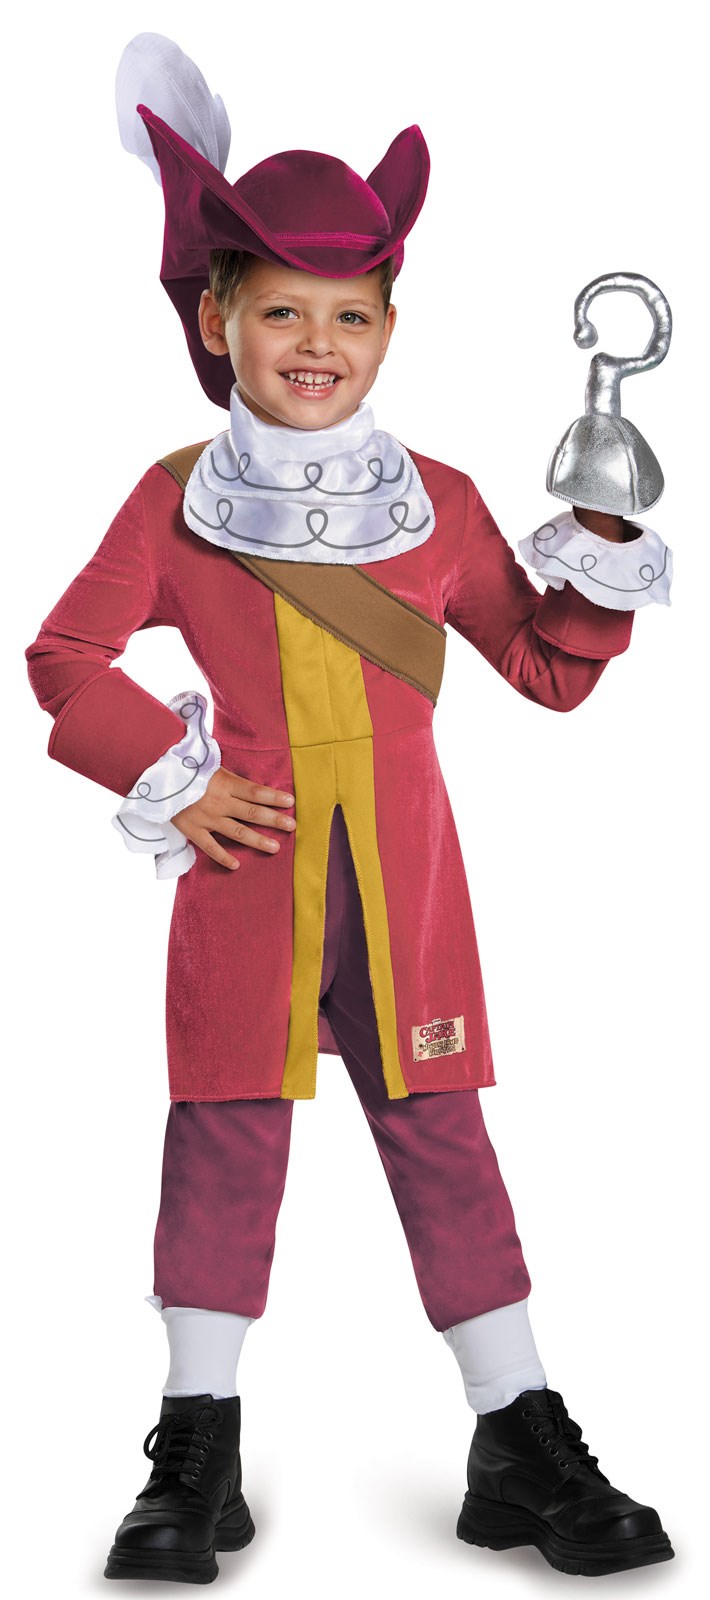 Captain Jake and the Never Land Pirates: Kids Deluxe Captain Hook Costume